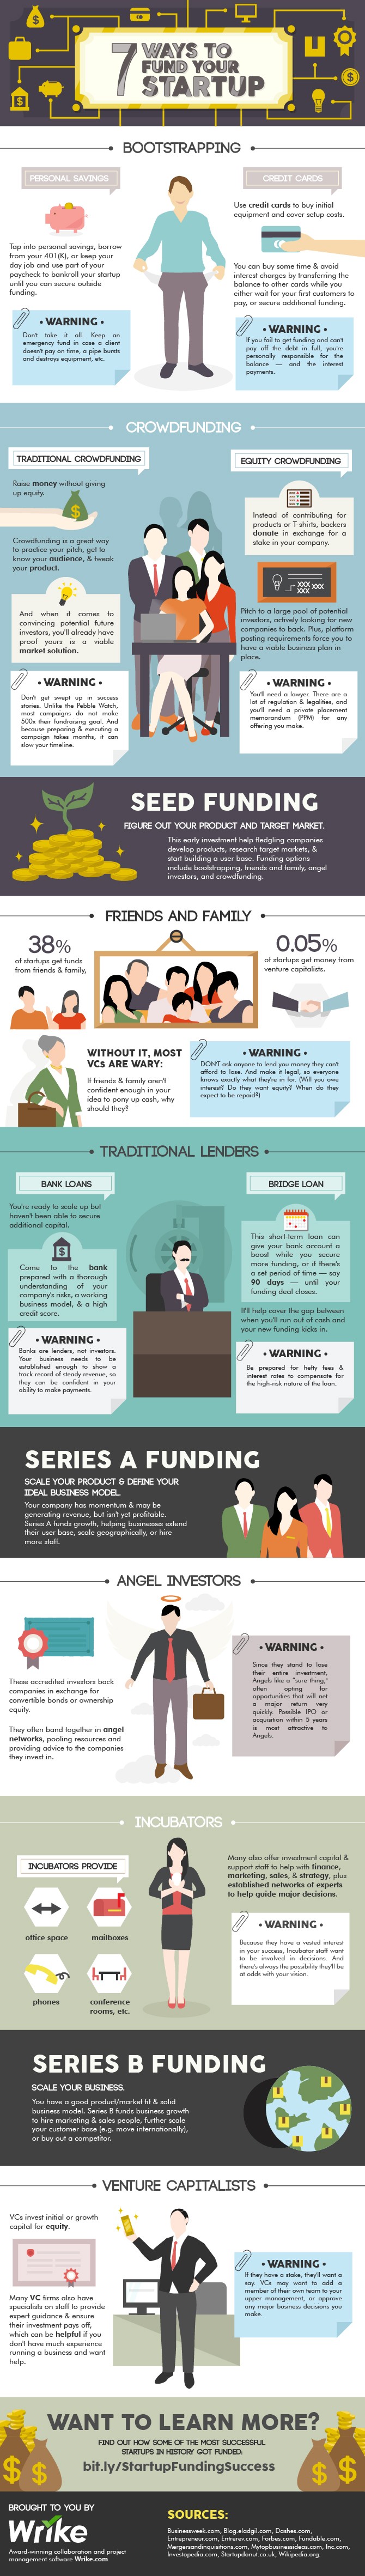 7 Ways to Fund Your Startup #infographic